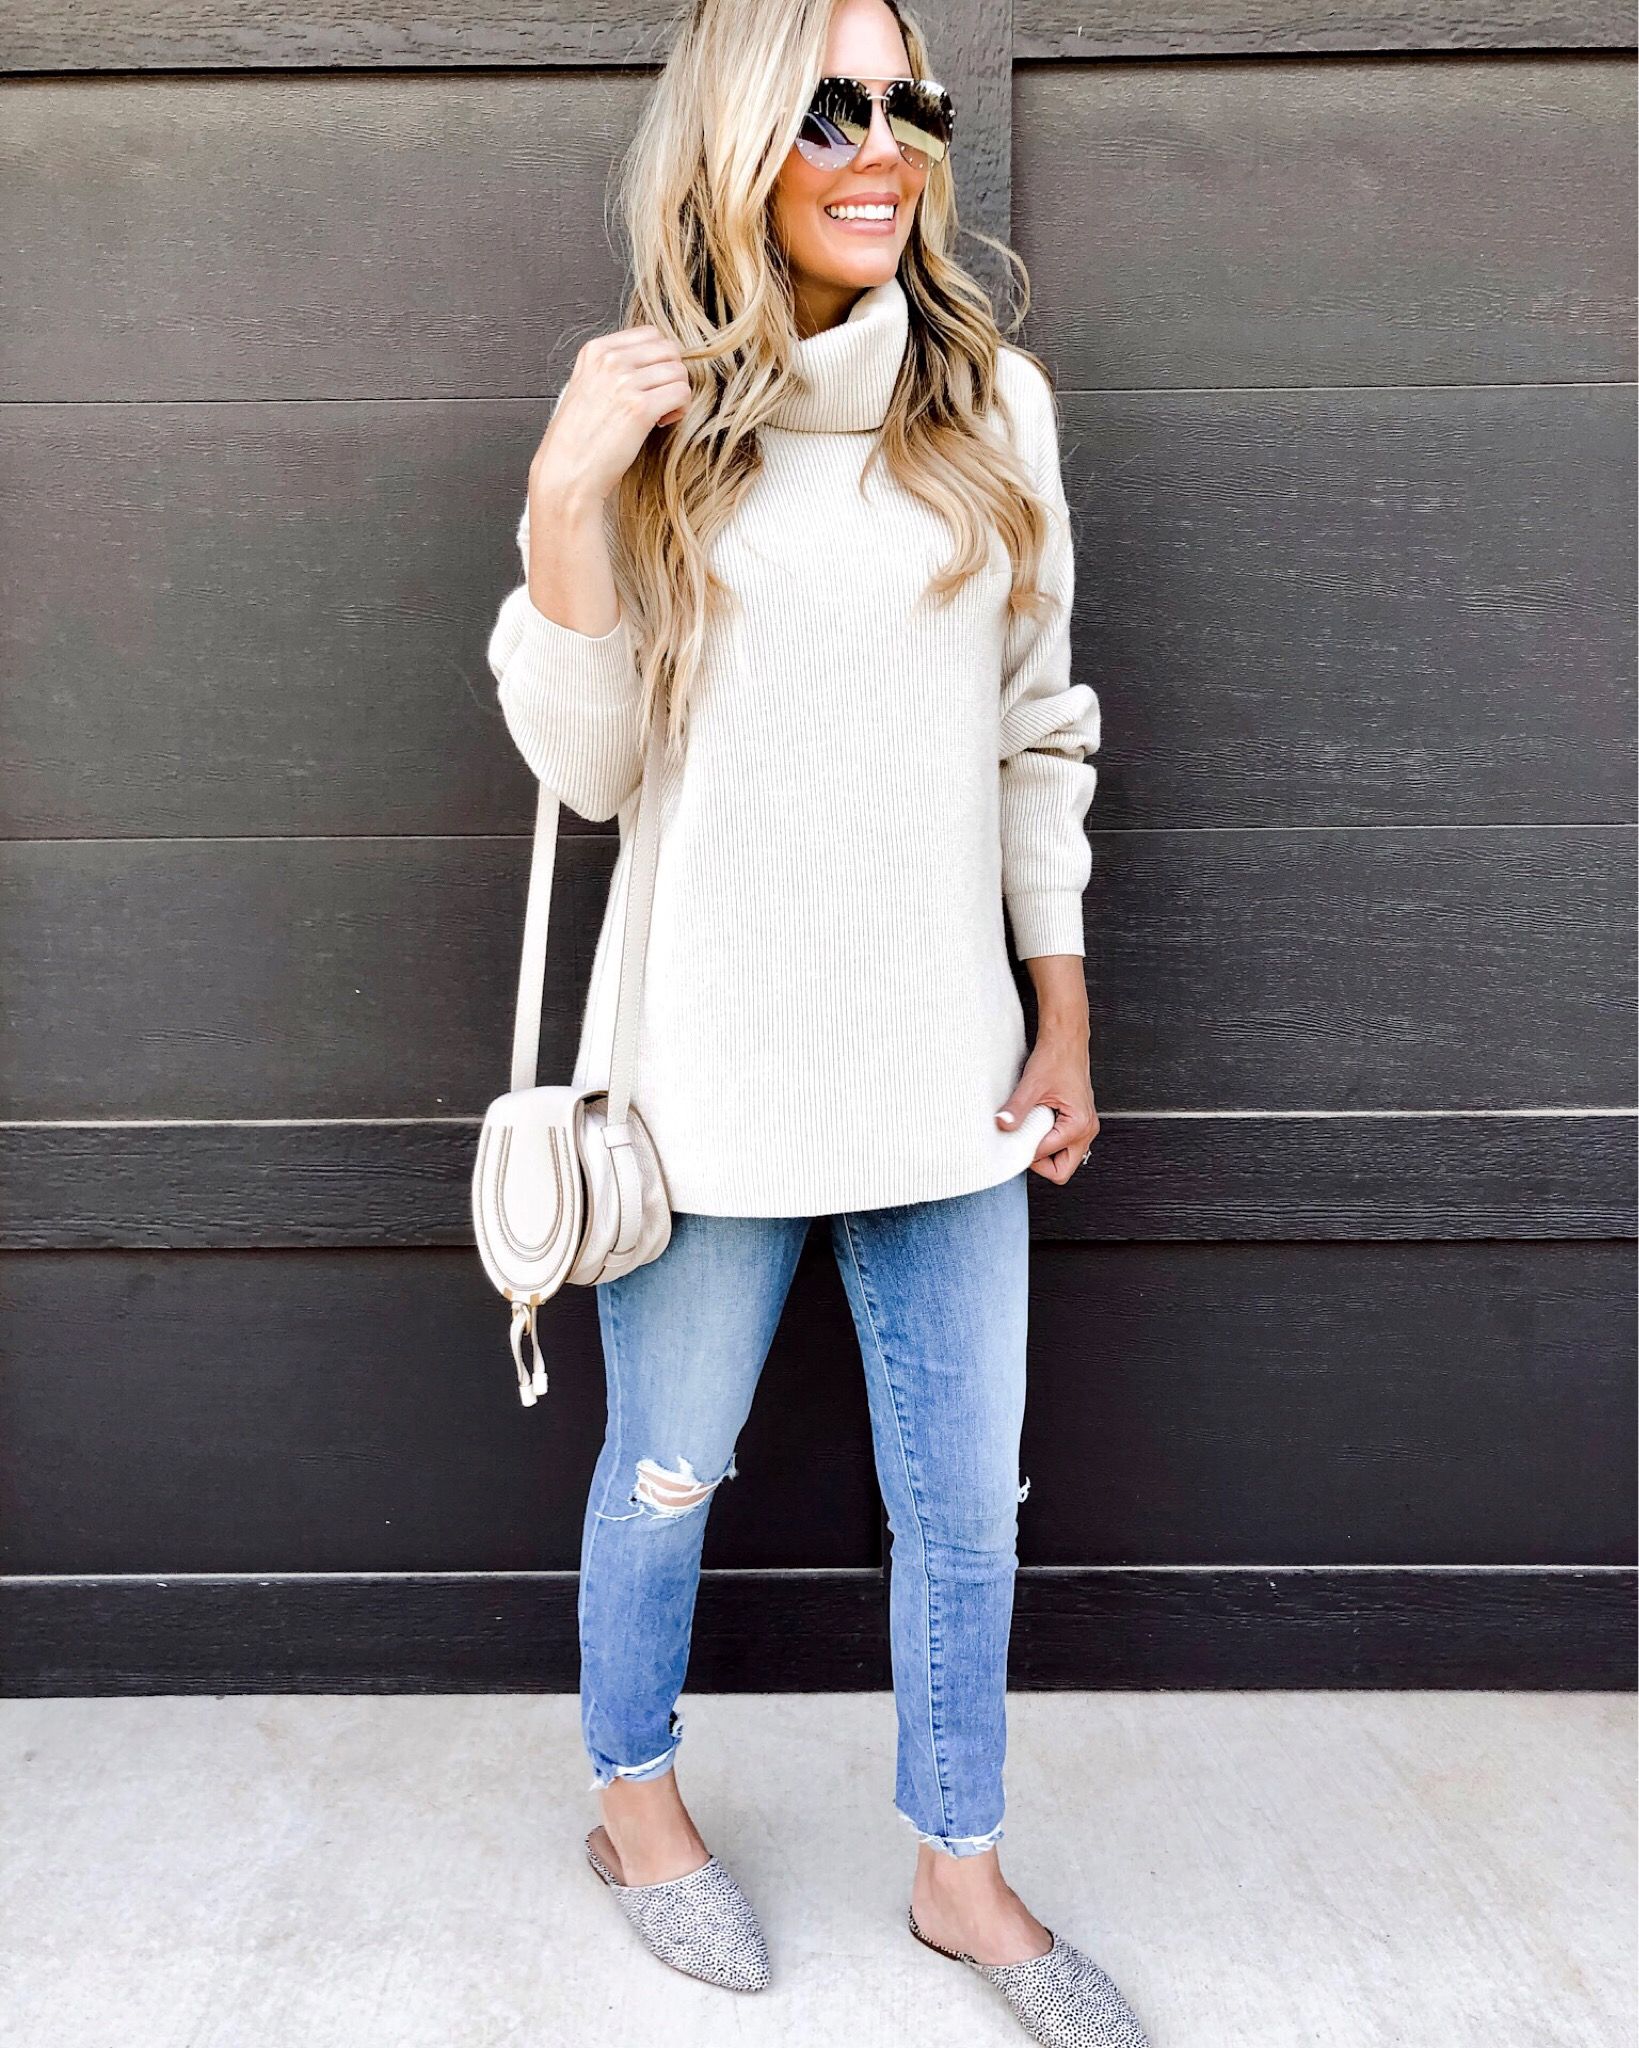 Tunic Sweater Outfit Ideas for
  Women